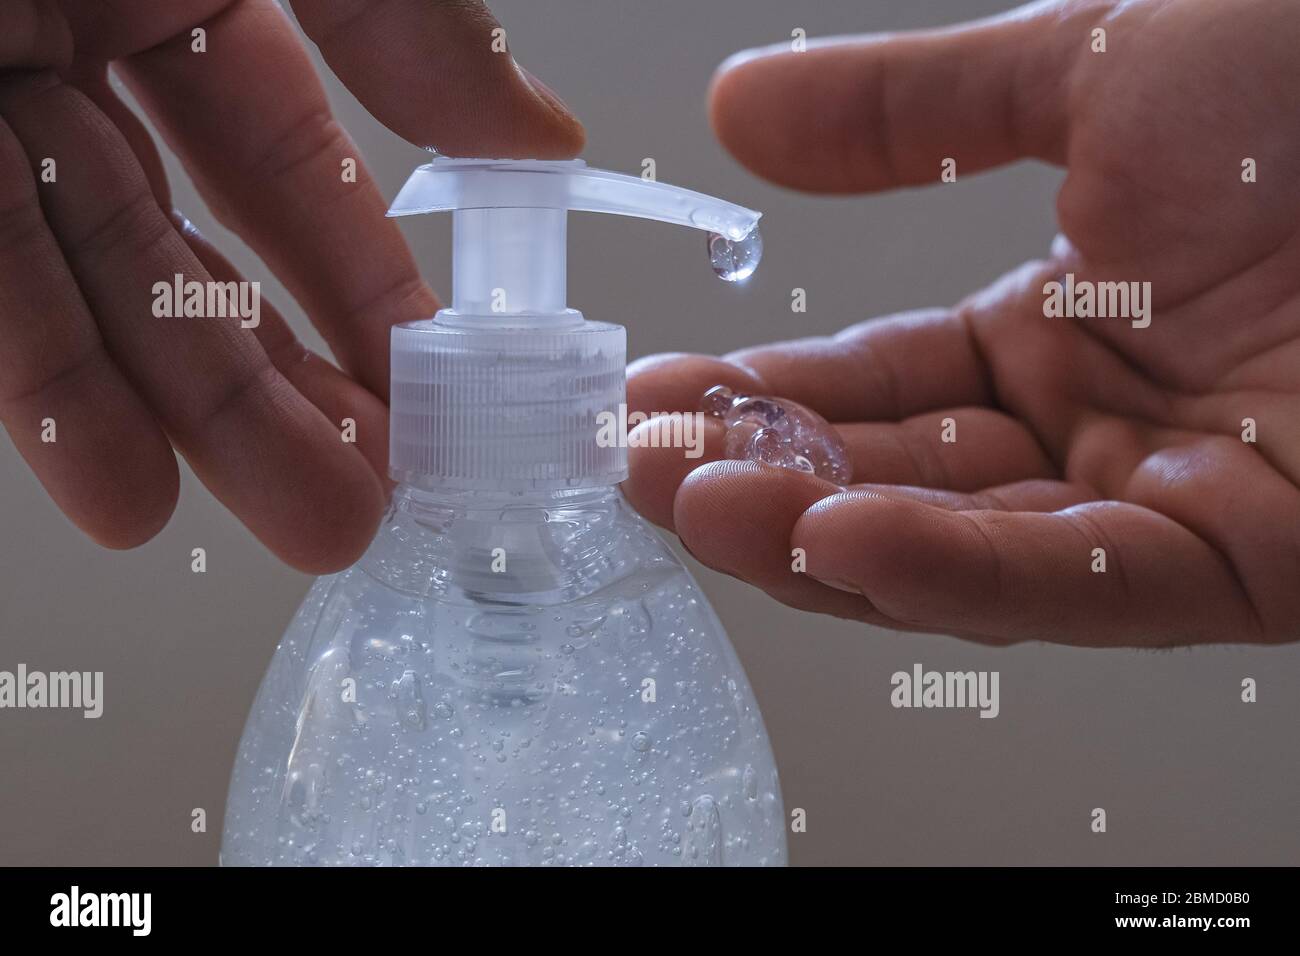 Guy hands while sanitize with alcohol hand sanitizer dispenser,corona virus covid disease Stock Photo